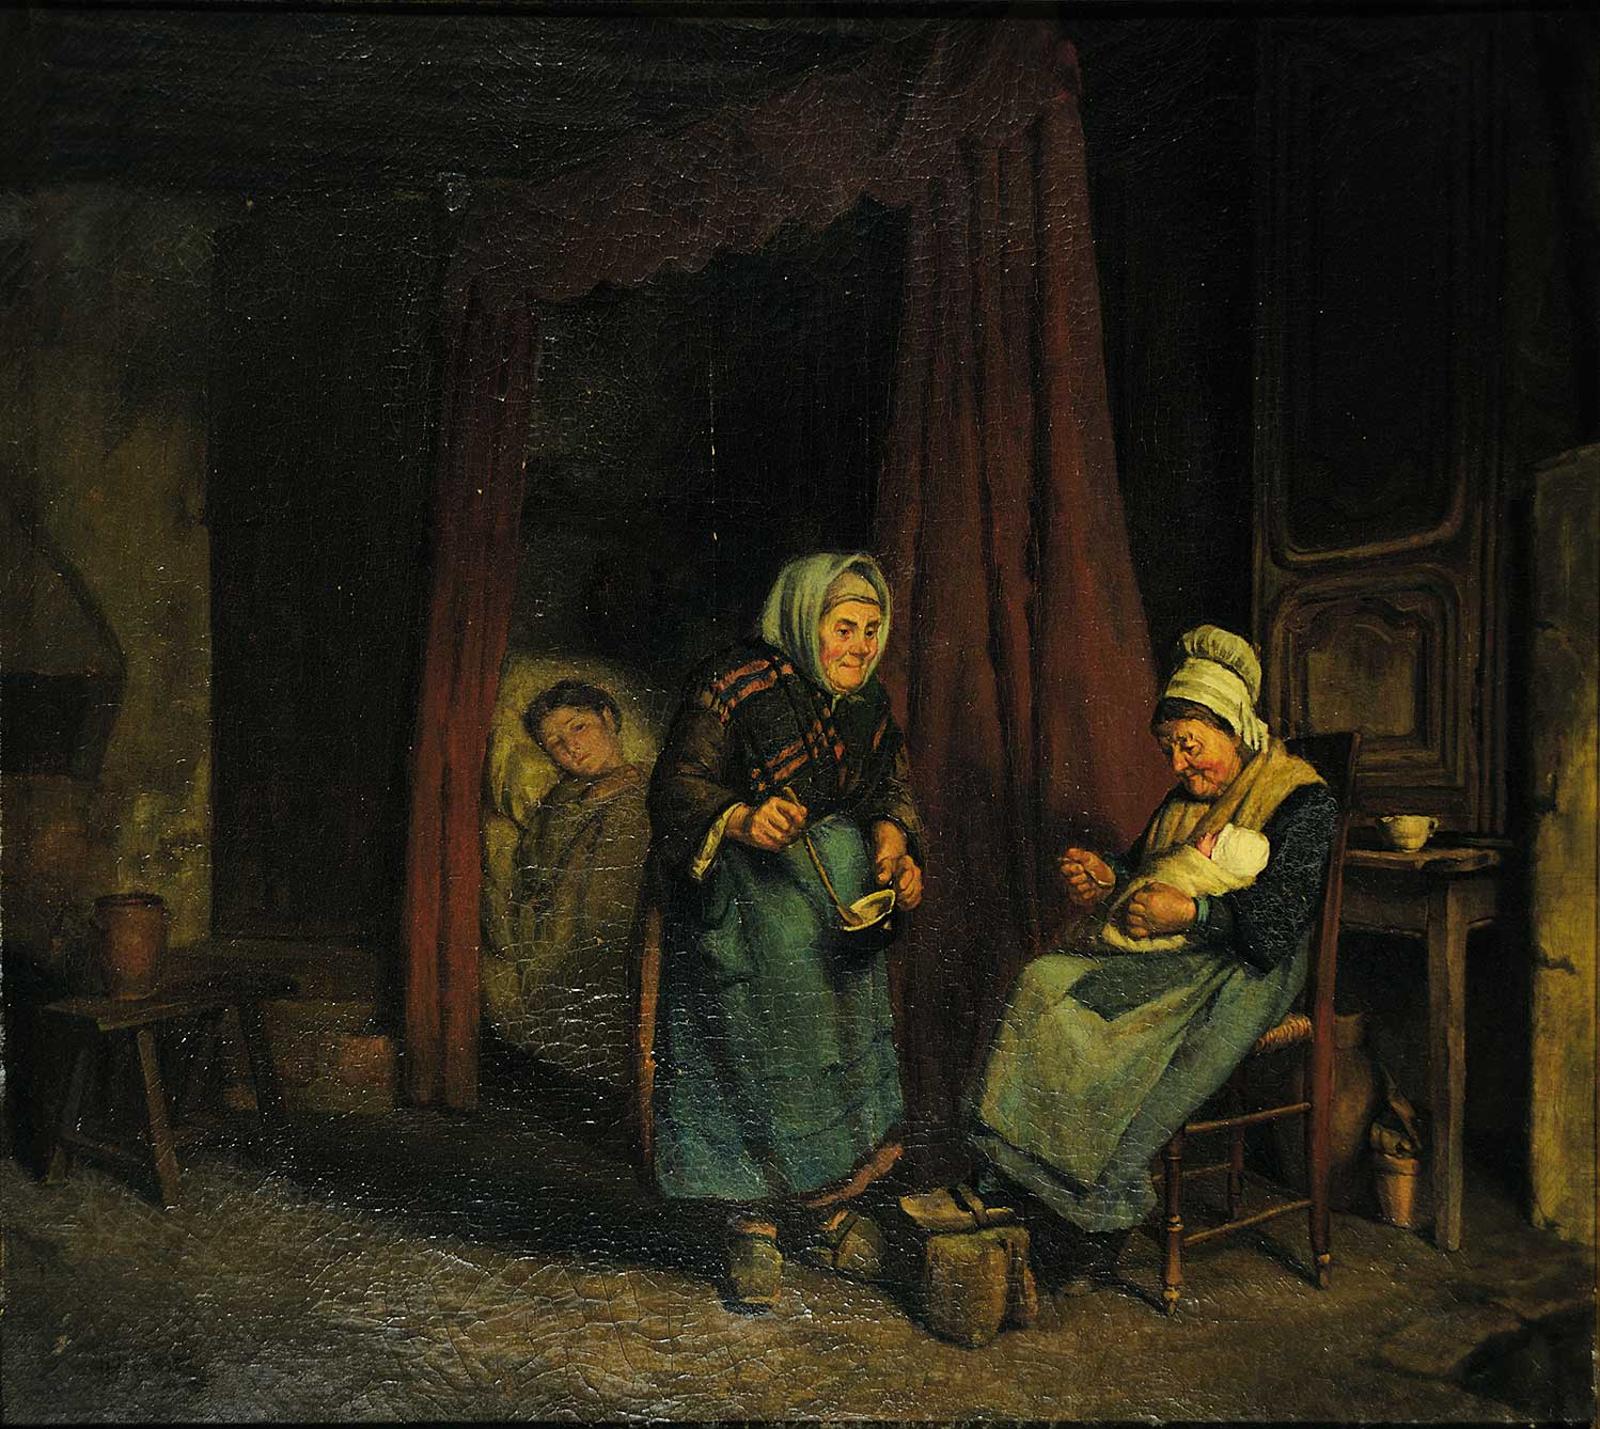 Howard Helmick (1845-1907) - Untitled - Midwives Tending to the Newborn Baby